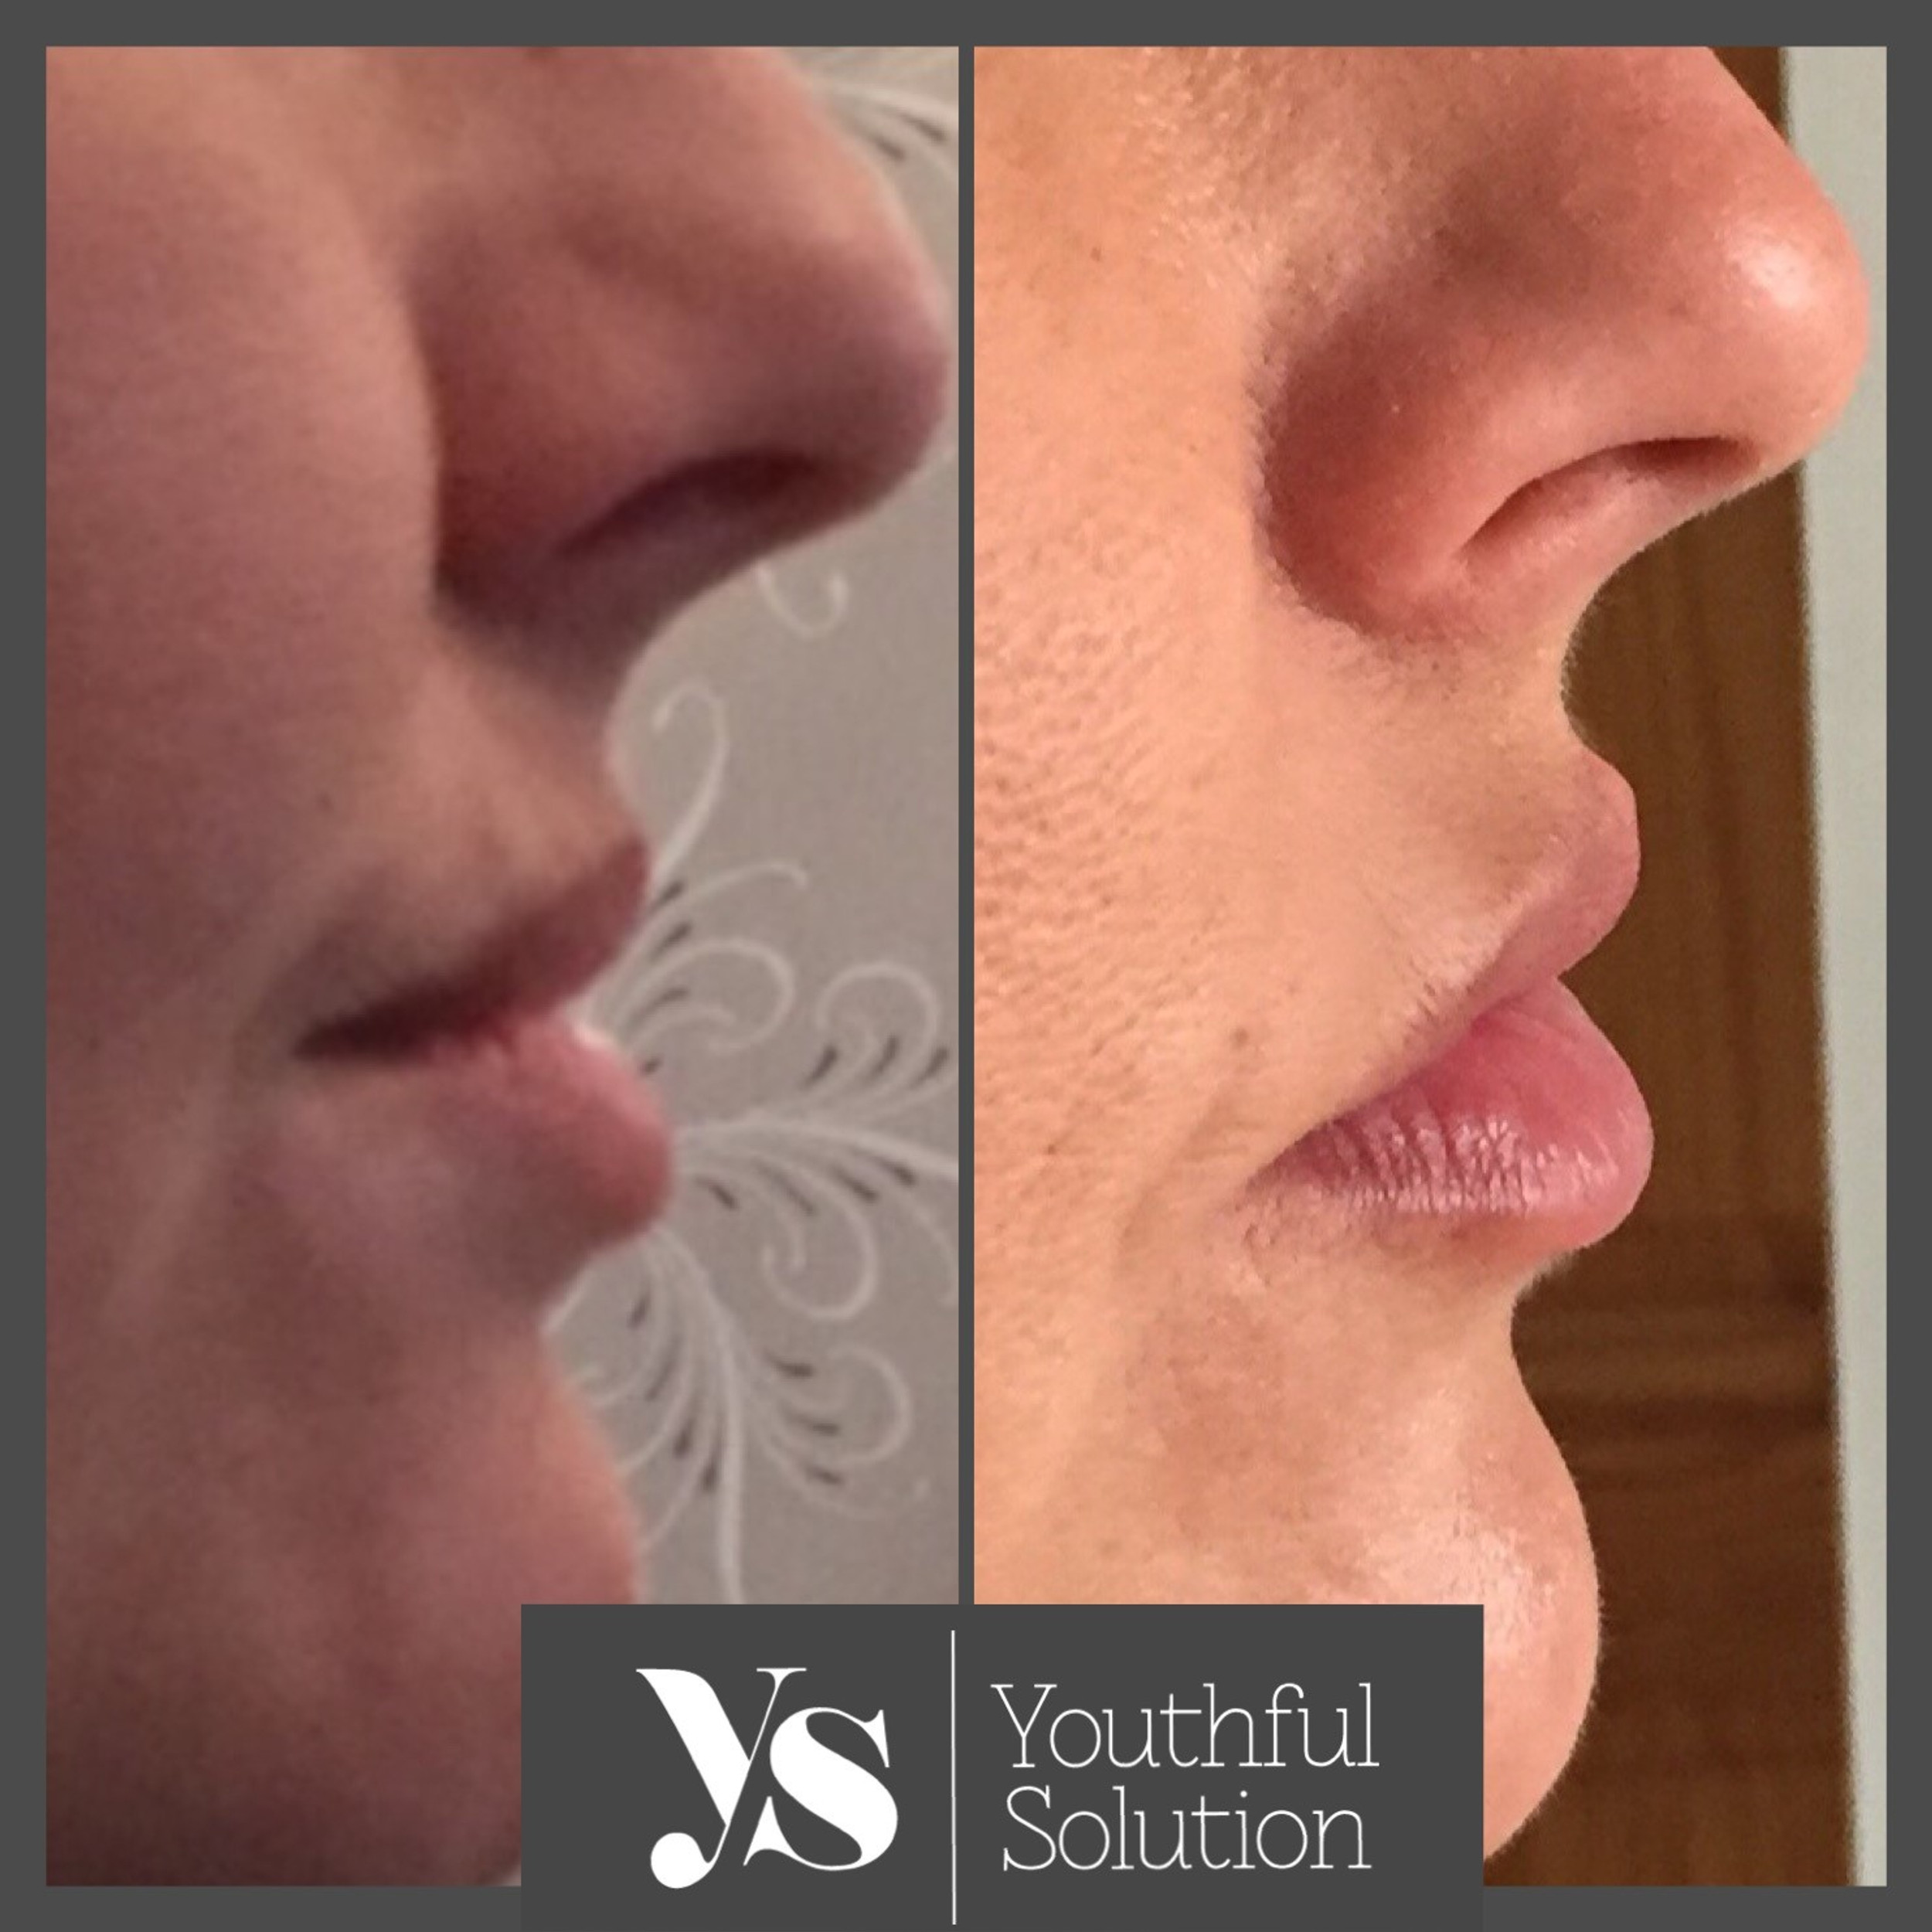 Facial Filler Treatment Doctor In Urmston | Youthful-solution